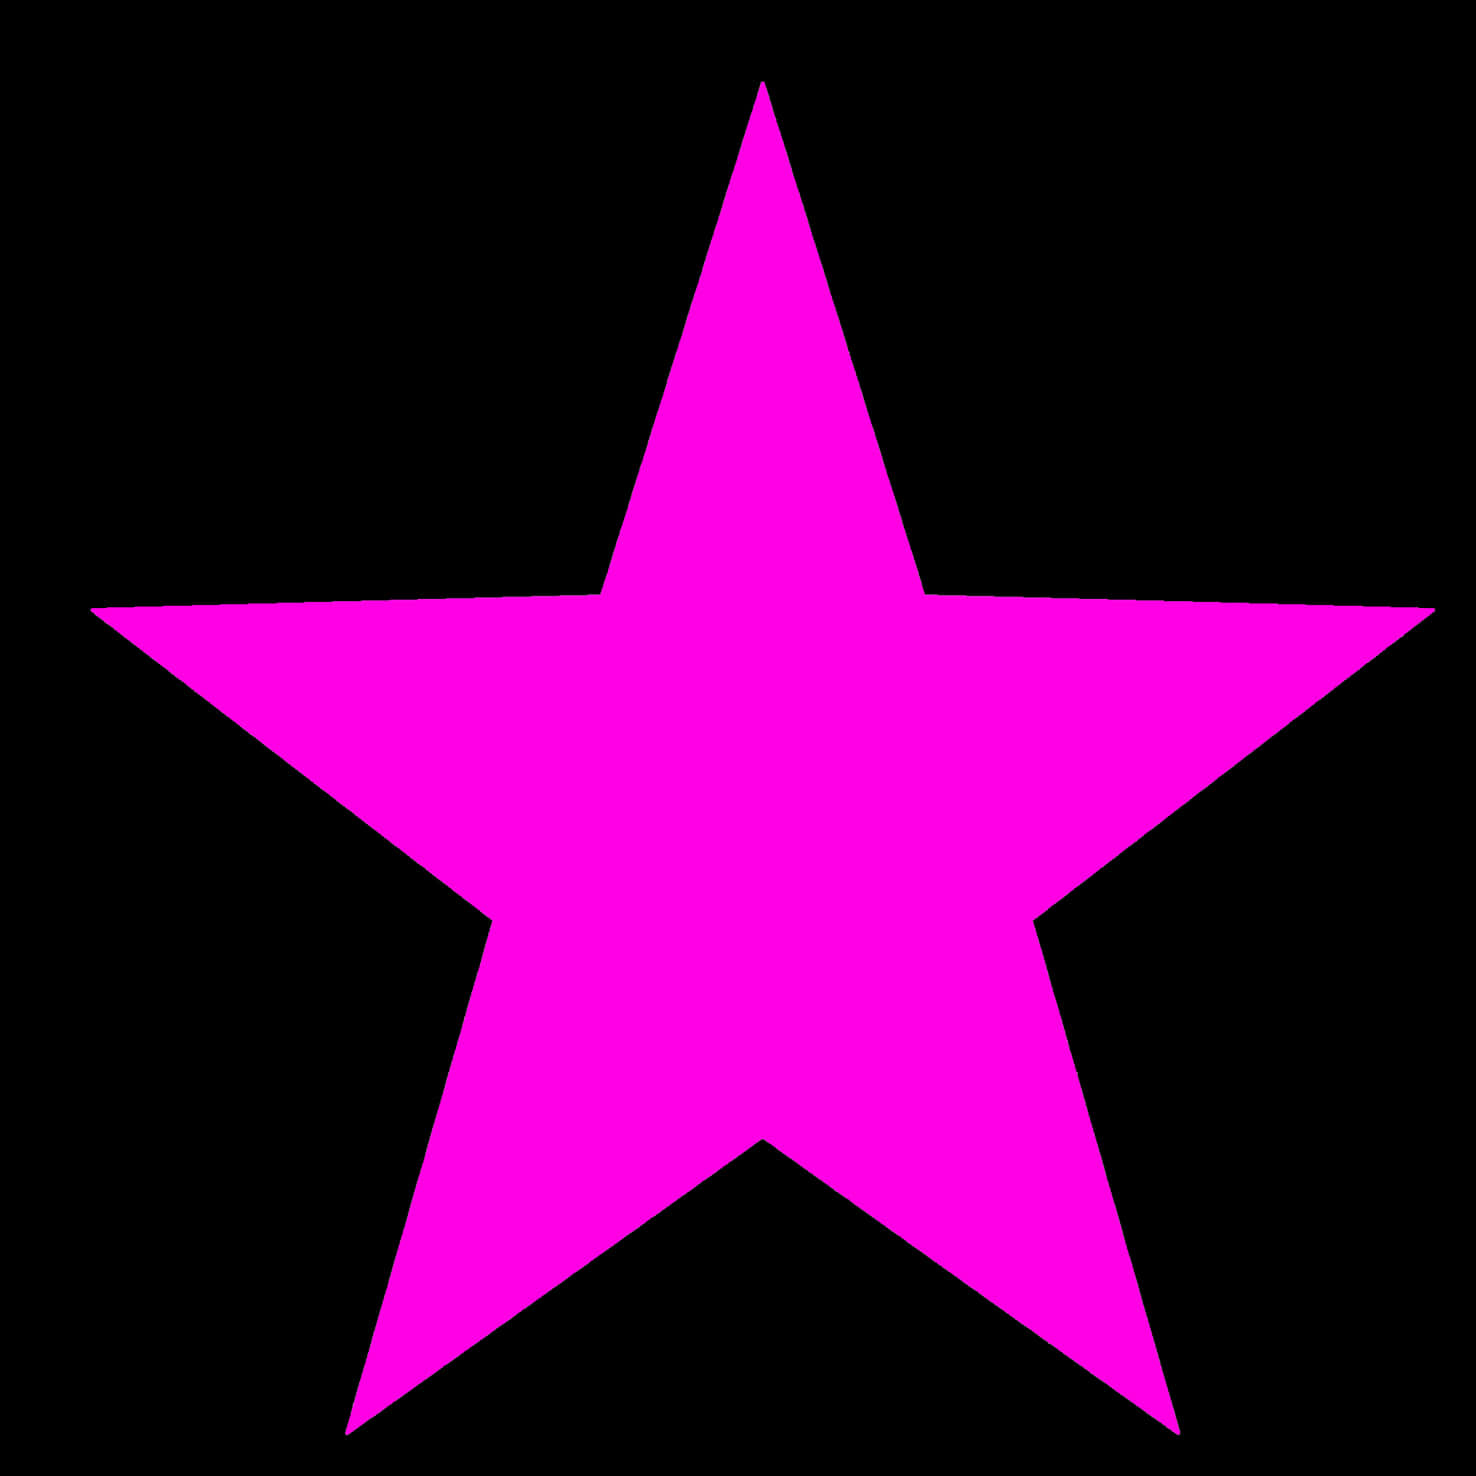 A brilliant pink star in the sky